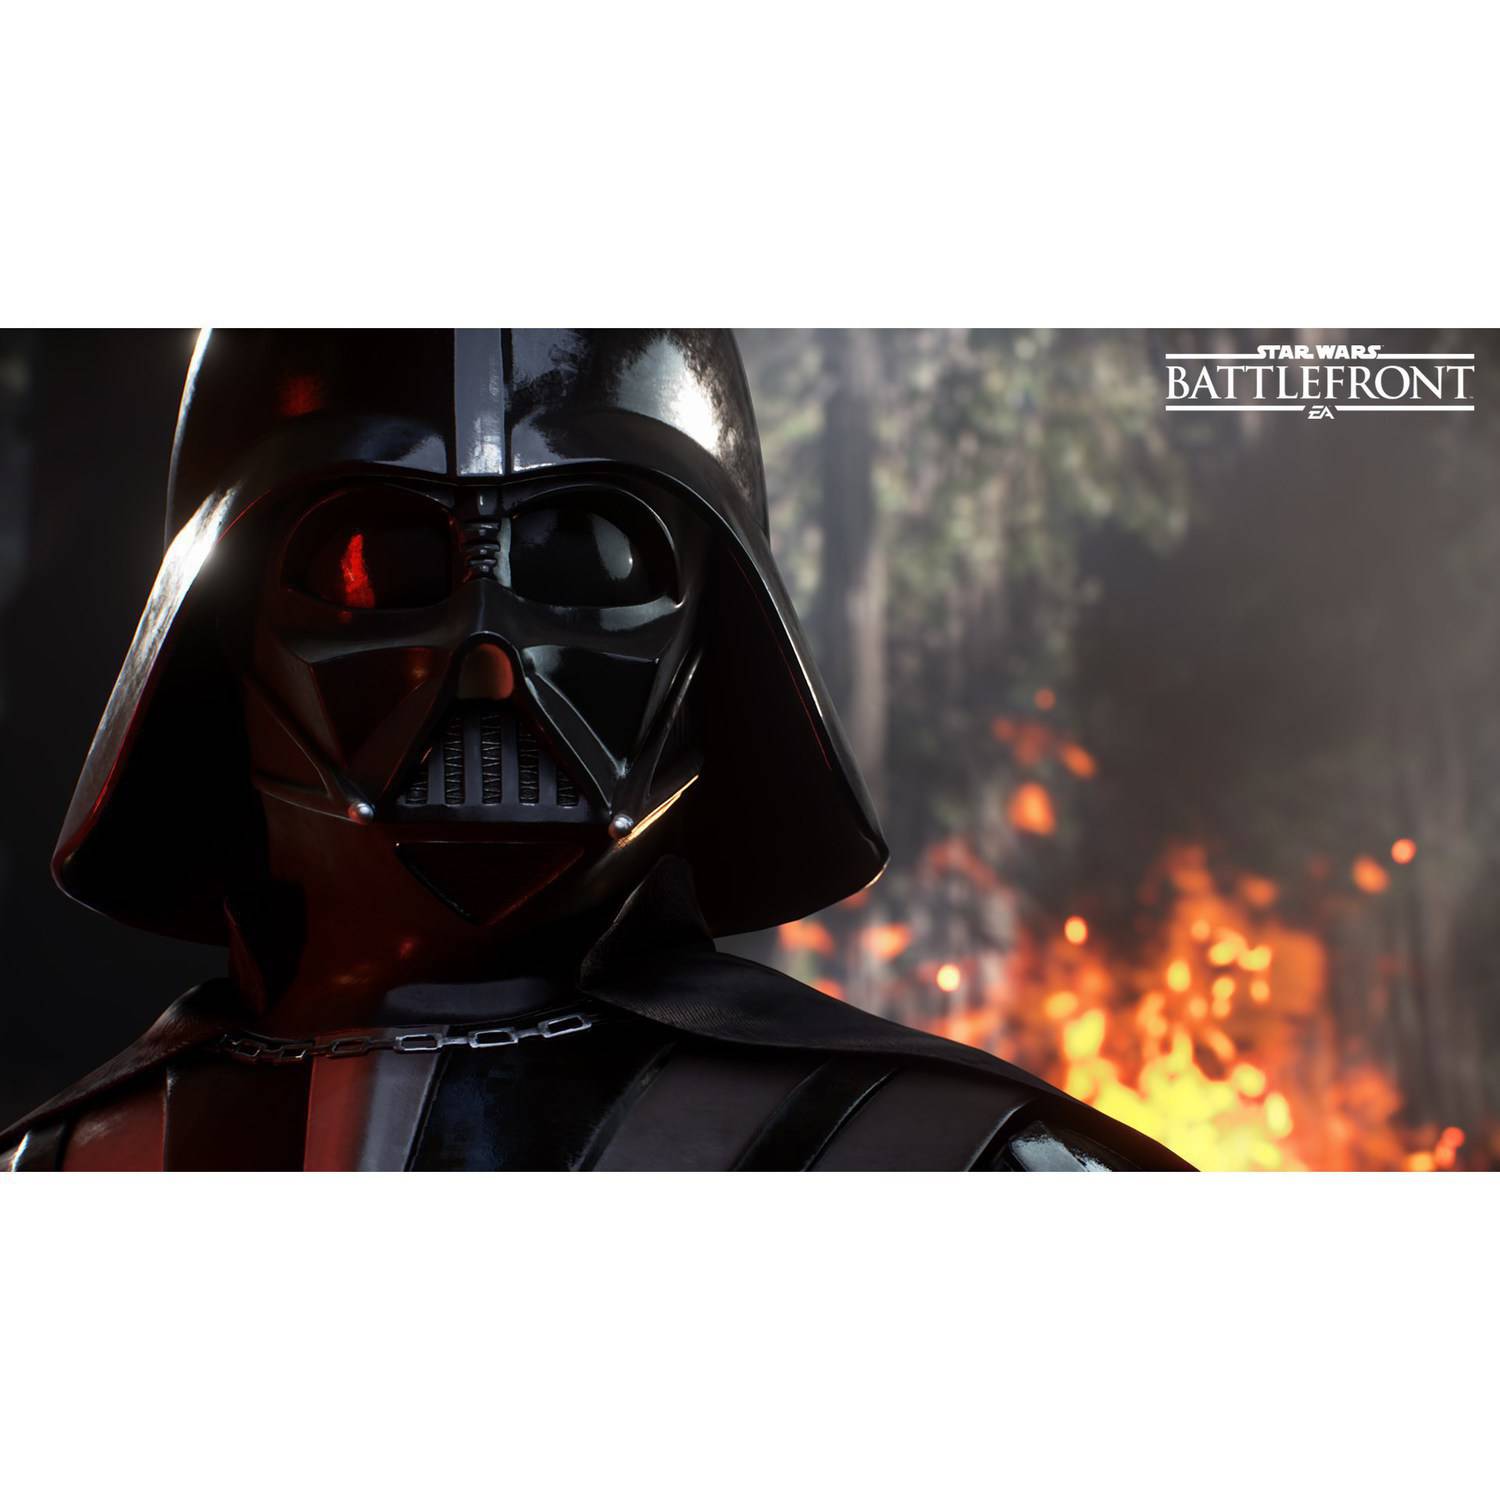 Electronic Arts Star Wars Battlefront for Xbox One - image 2 of 5